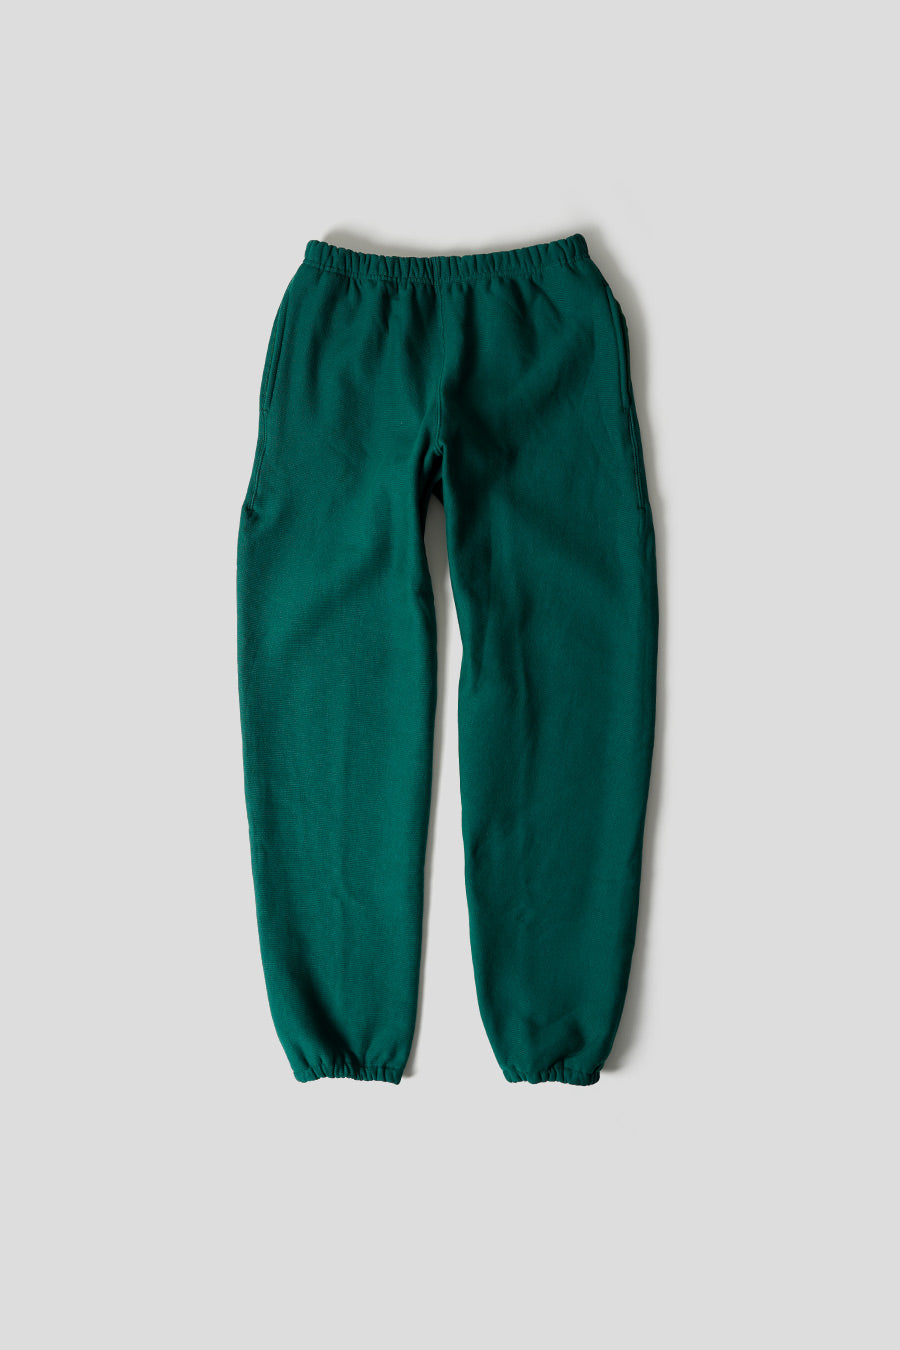 CAMBER USA - CROSS-KNIT HEAVYWEIGHT GREEN TRACK TROUSERS - LE LABO STORE